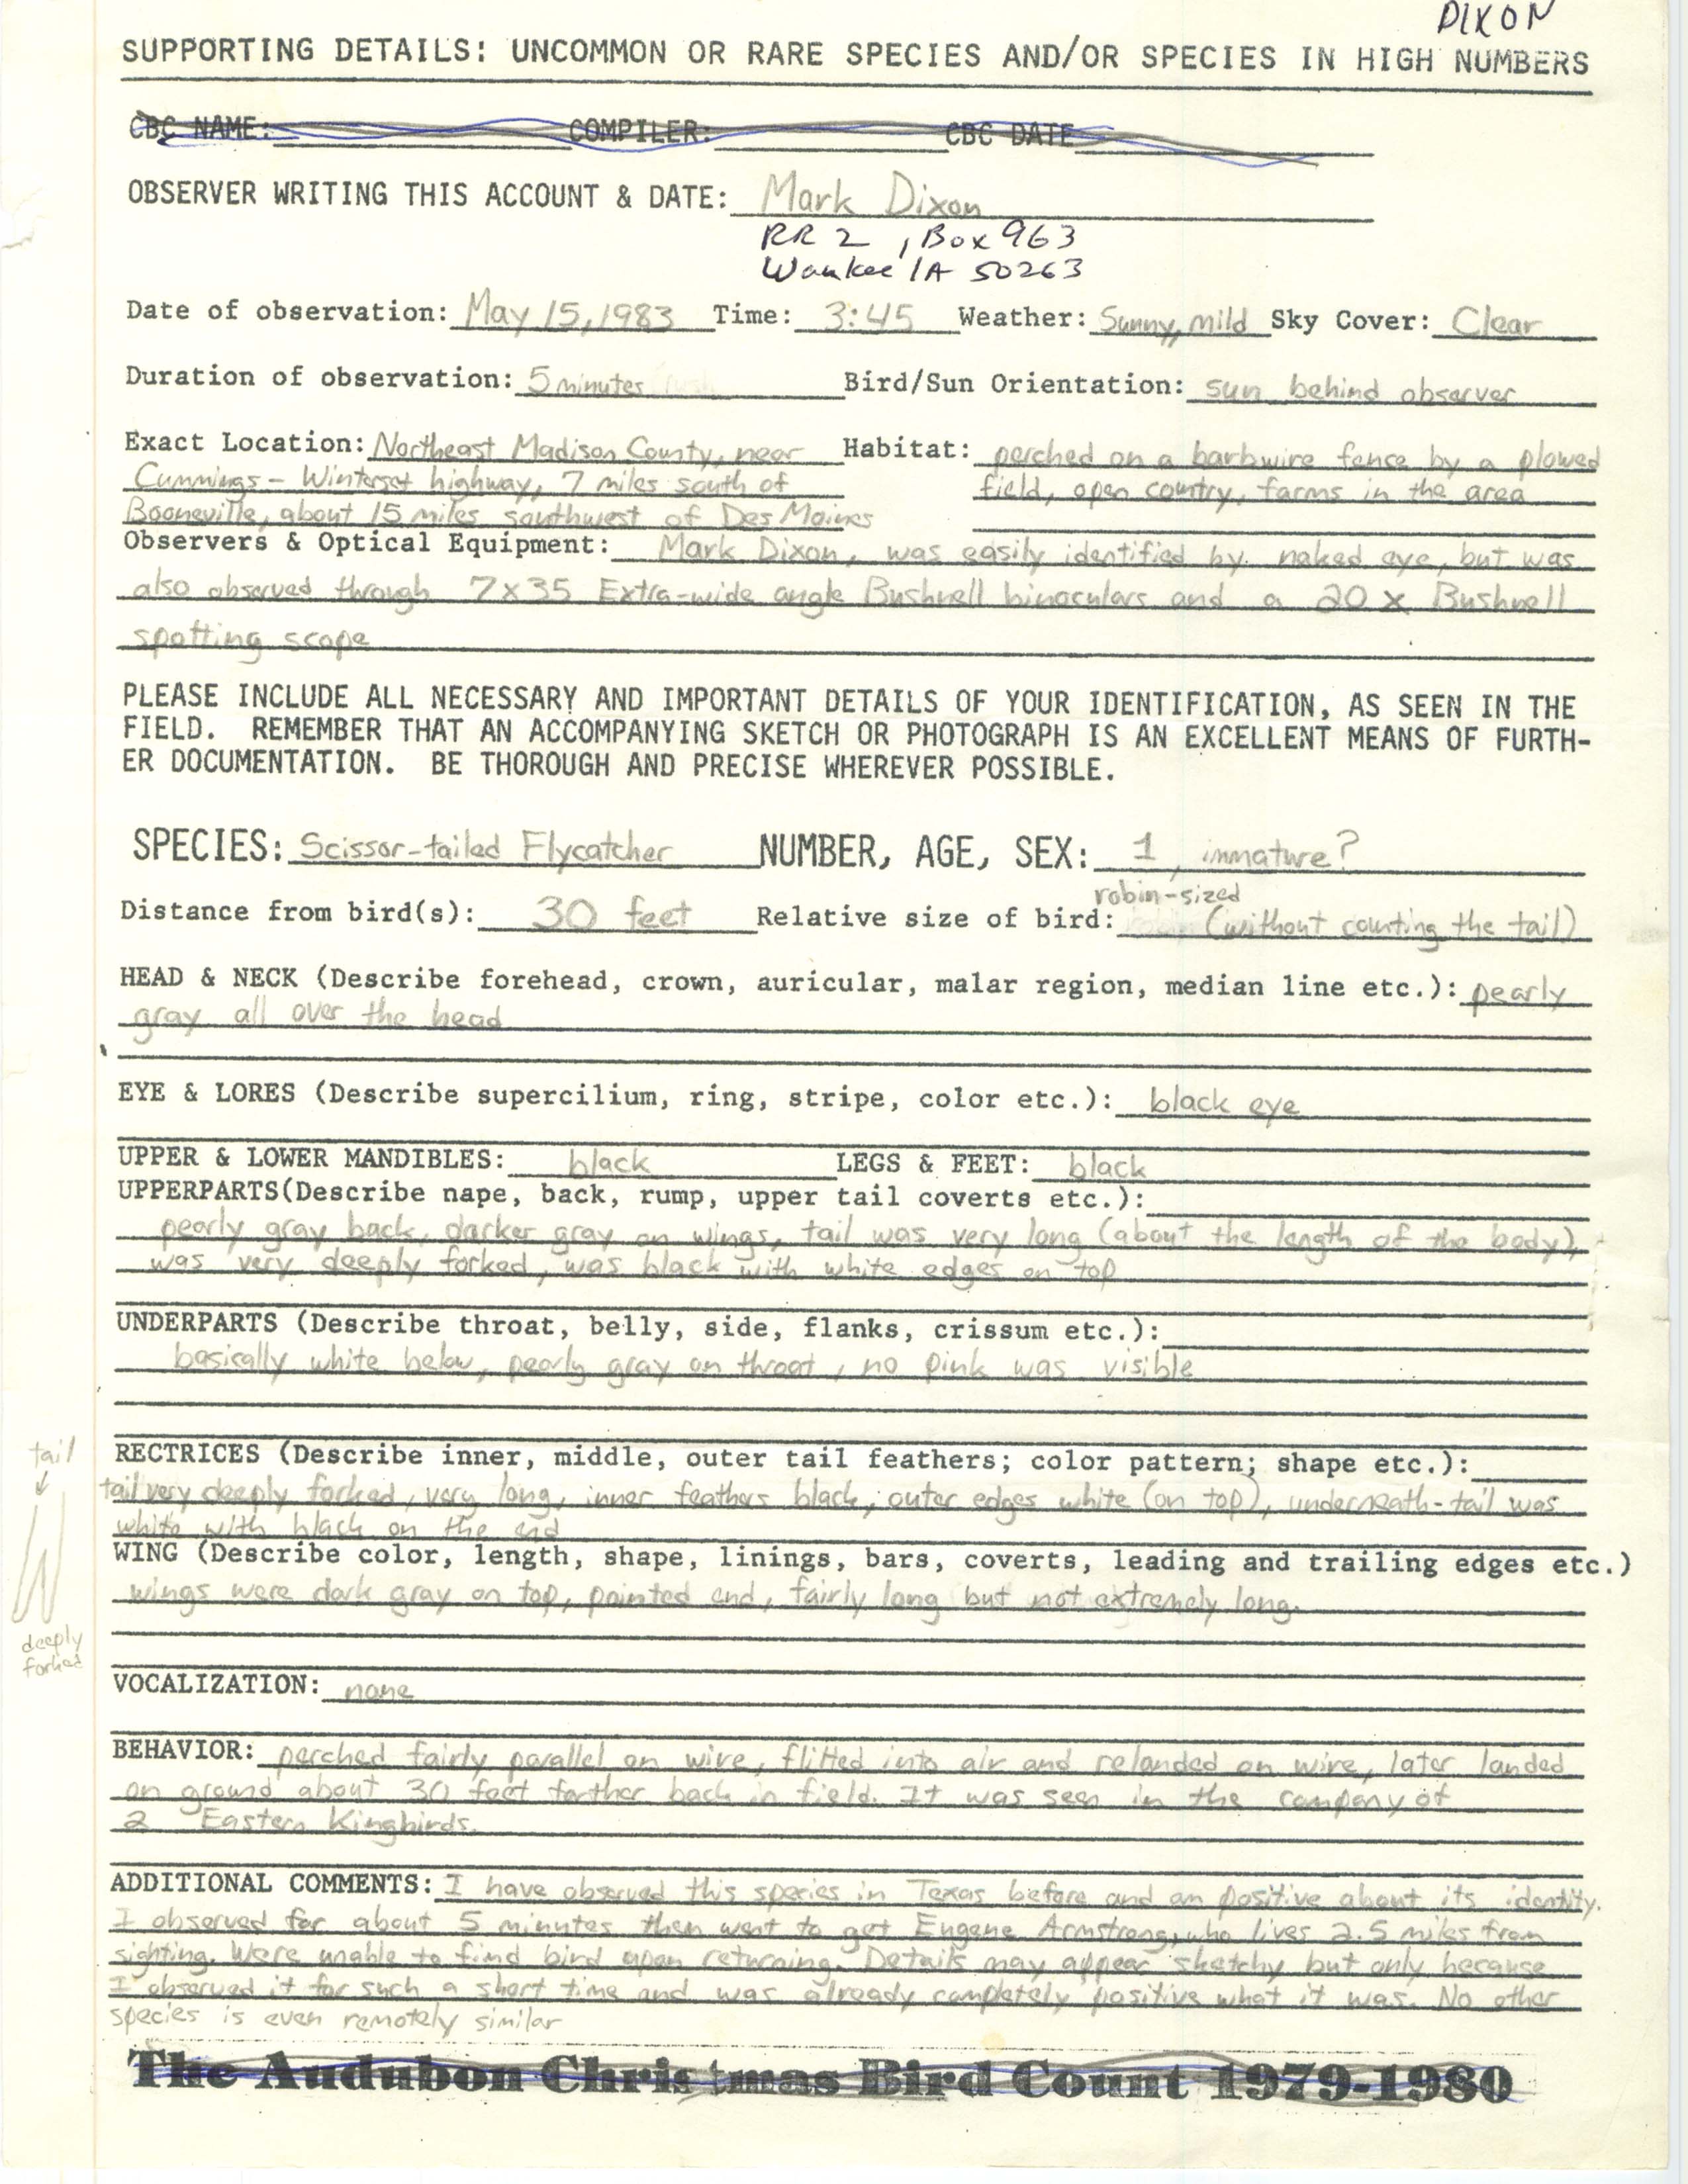 Rare bird documentation form for Scissor-tailed Flycatcher in northeast Madison County near Cumming in 1983